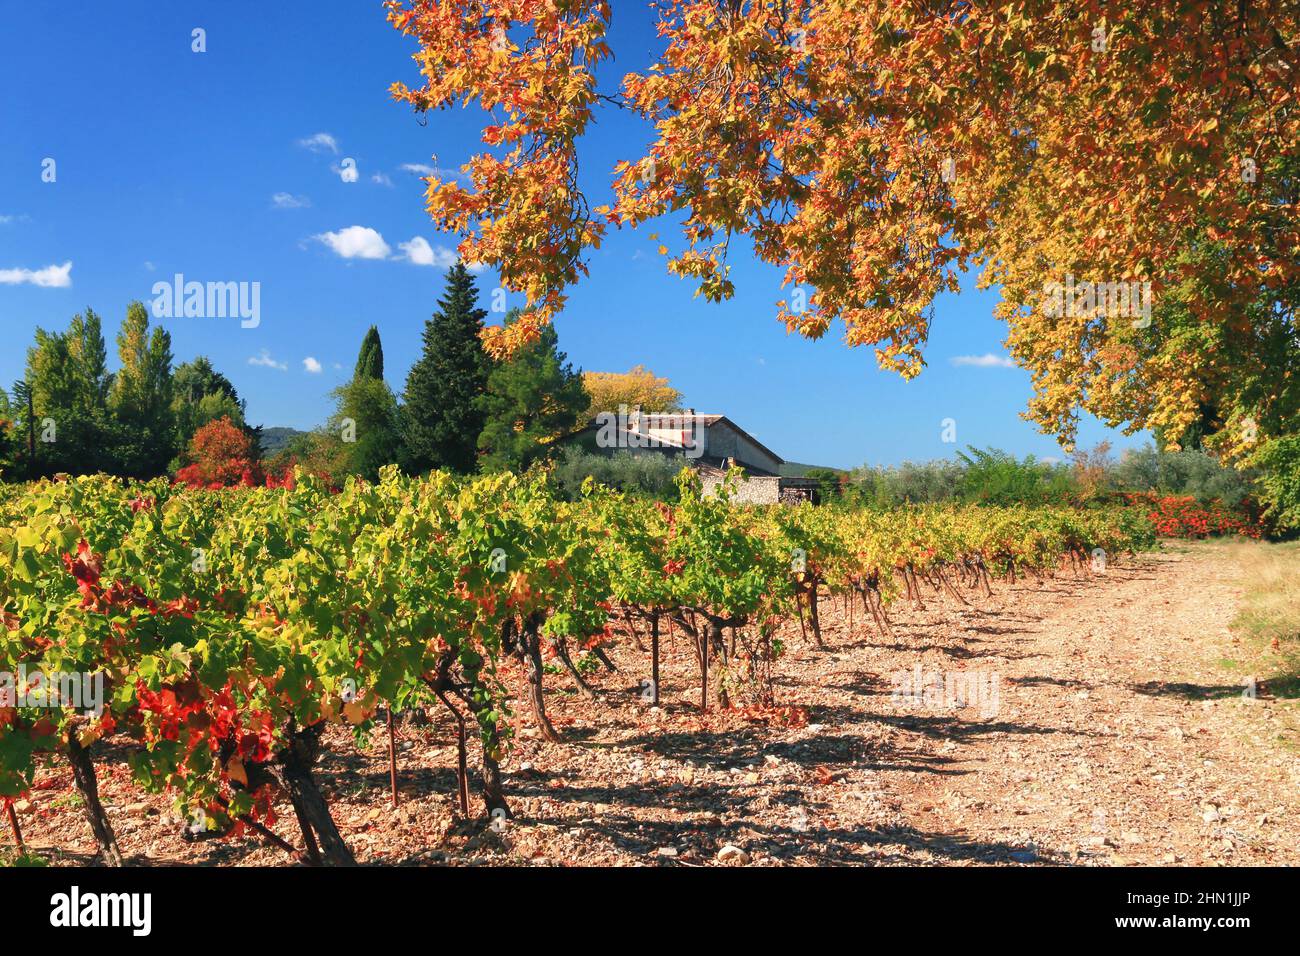 Vineyard and plane tree branches in autumn colors. Stock Photo